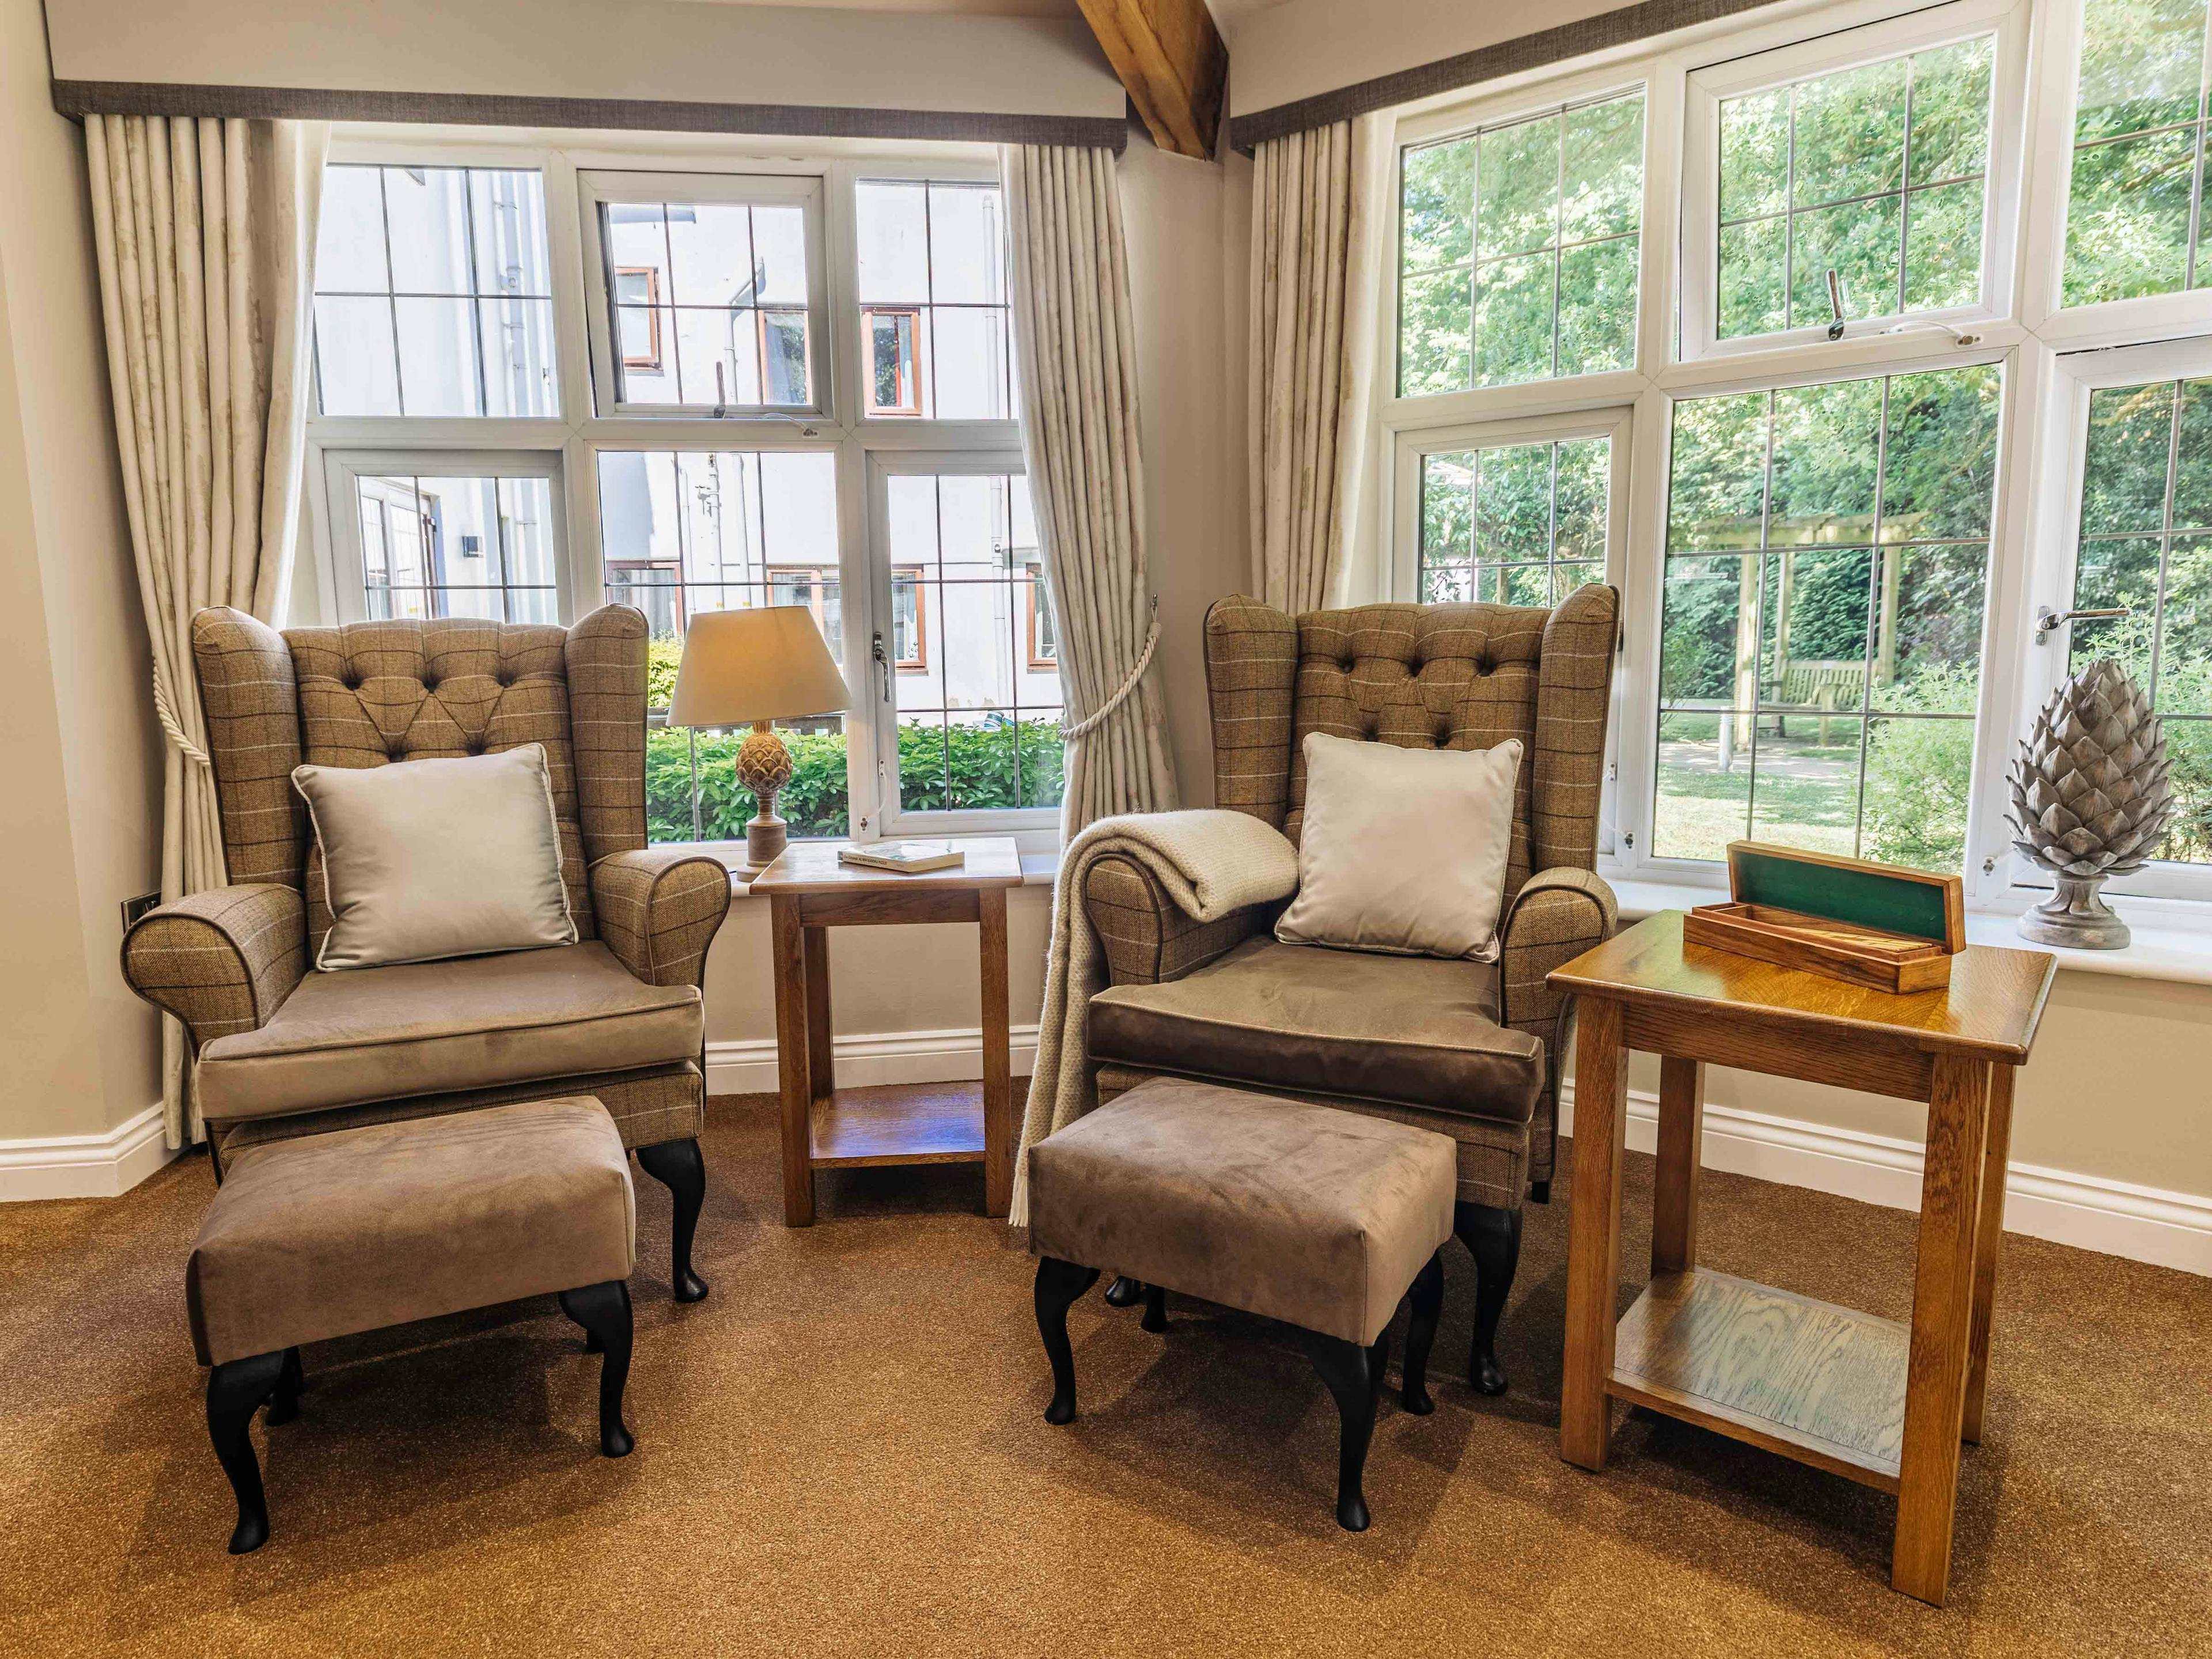 Communal Area at Lawton Manor Care Home in Kidsgrove, Newcastle-under-Lyme